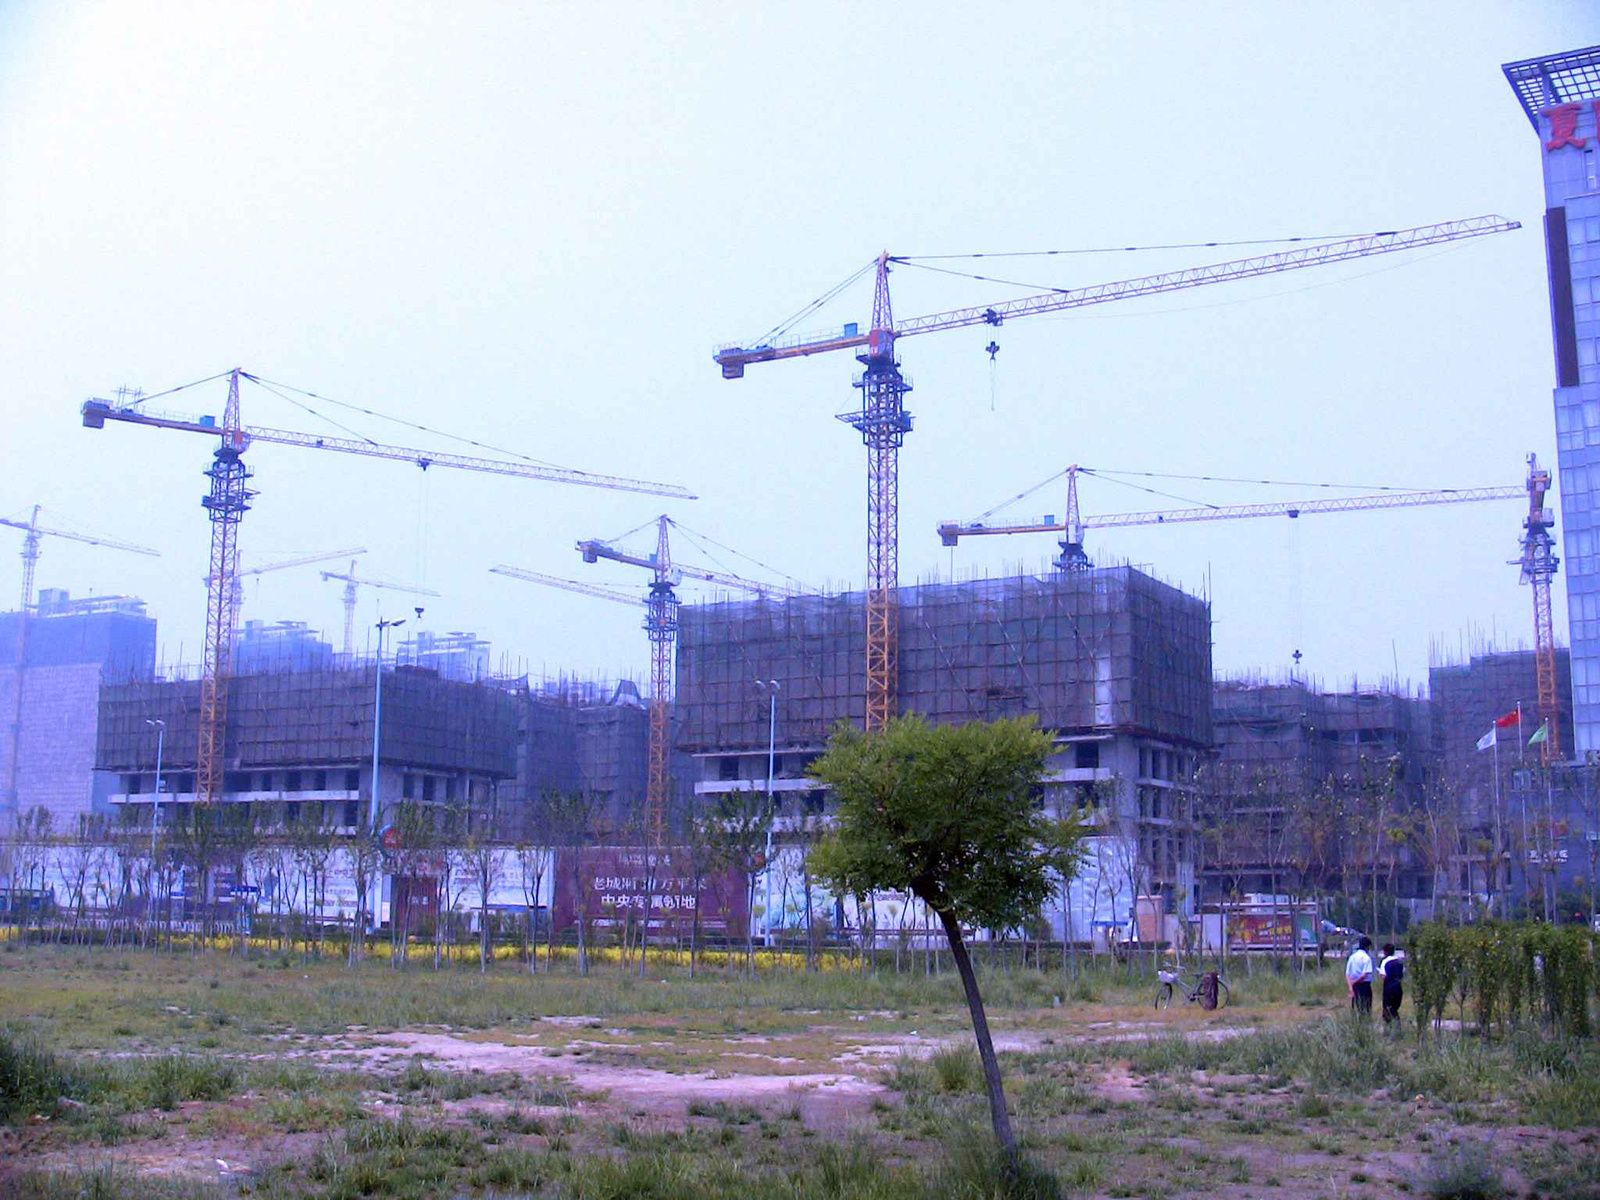 Construction site in Tianjin 2008